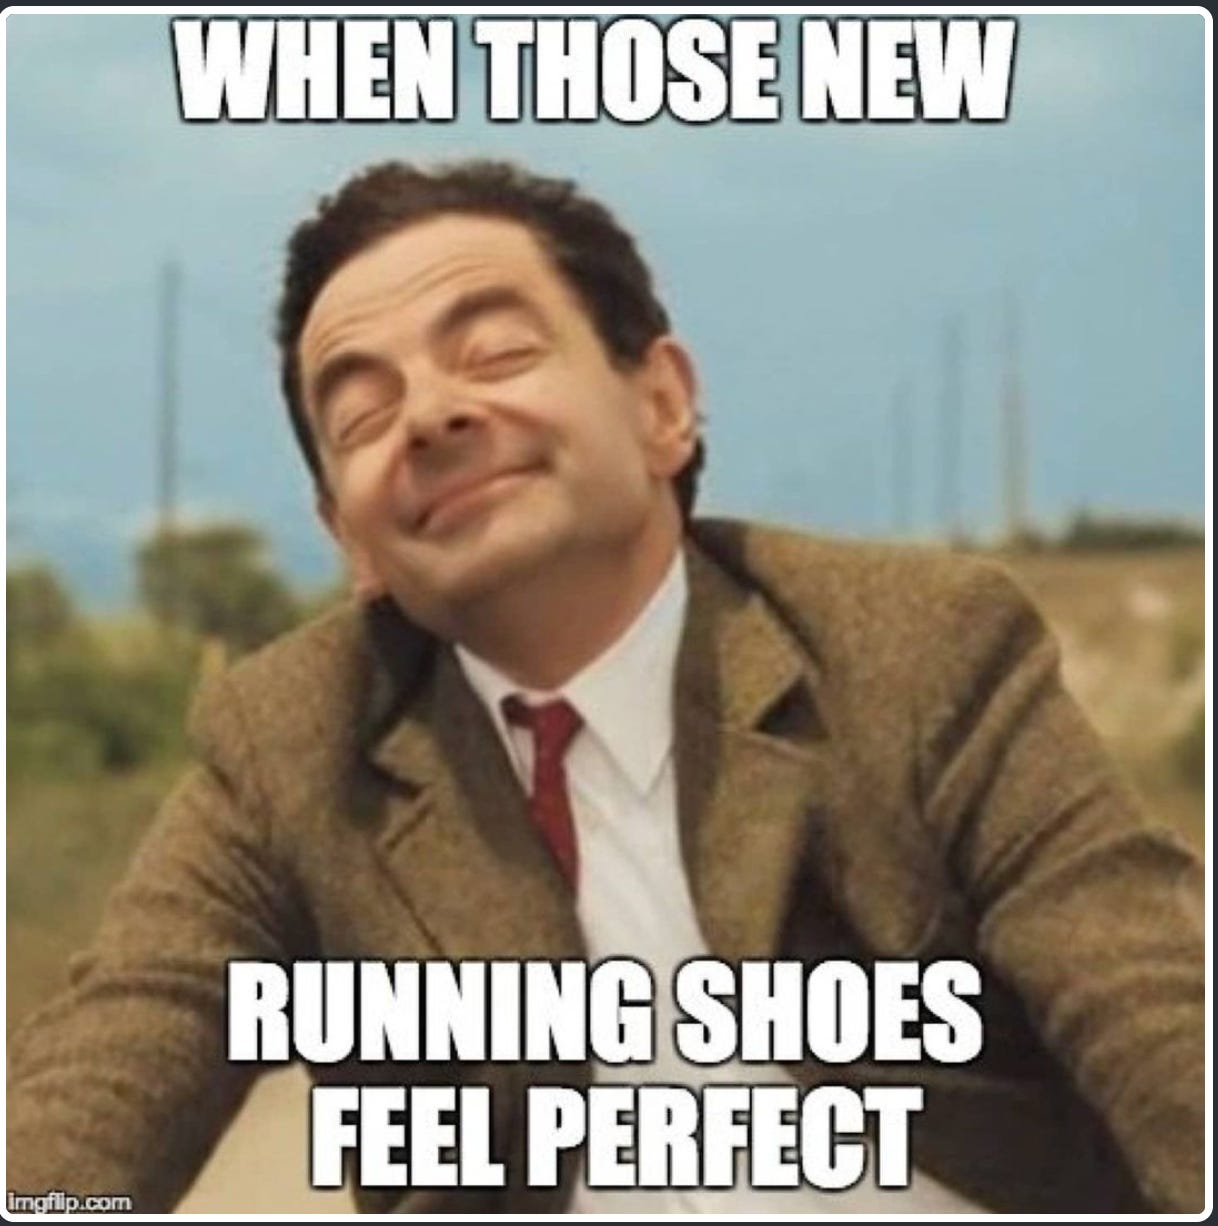 LOLZLetter 184 | How Can You Make Your Running Shoes Last Longer?